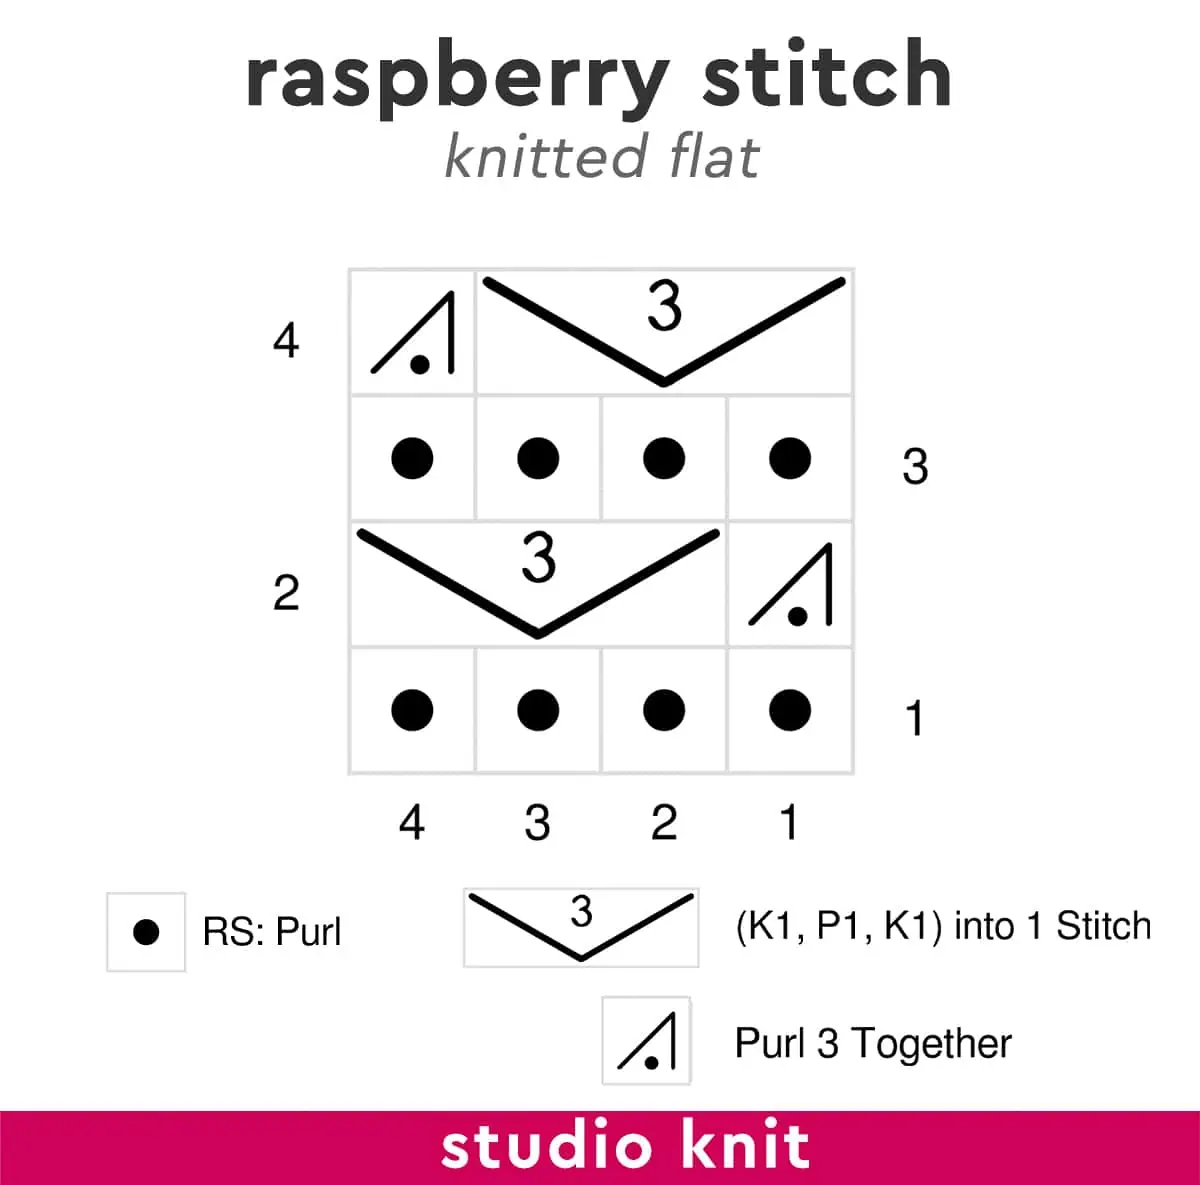 Knitting chart diagram of the Raspberry Bobble Stitch knitted flat.